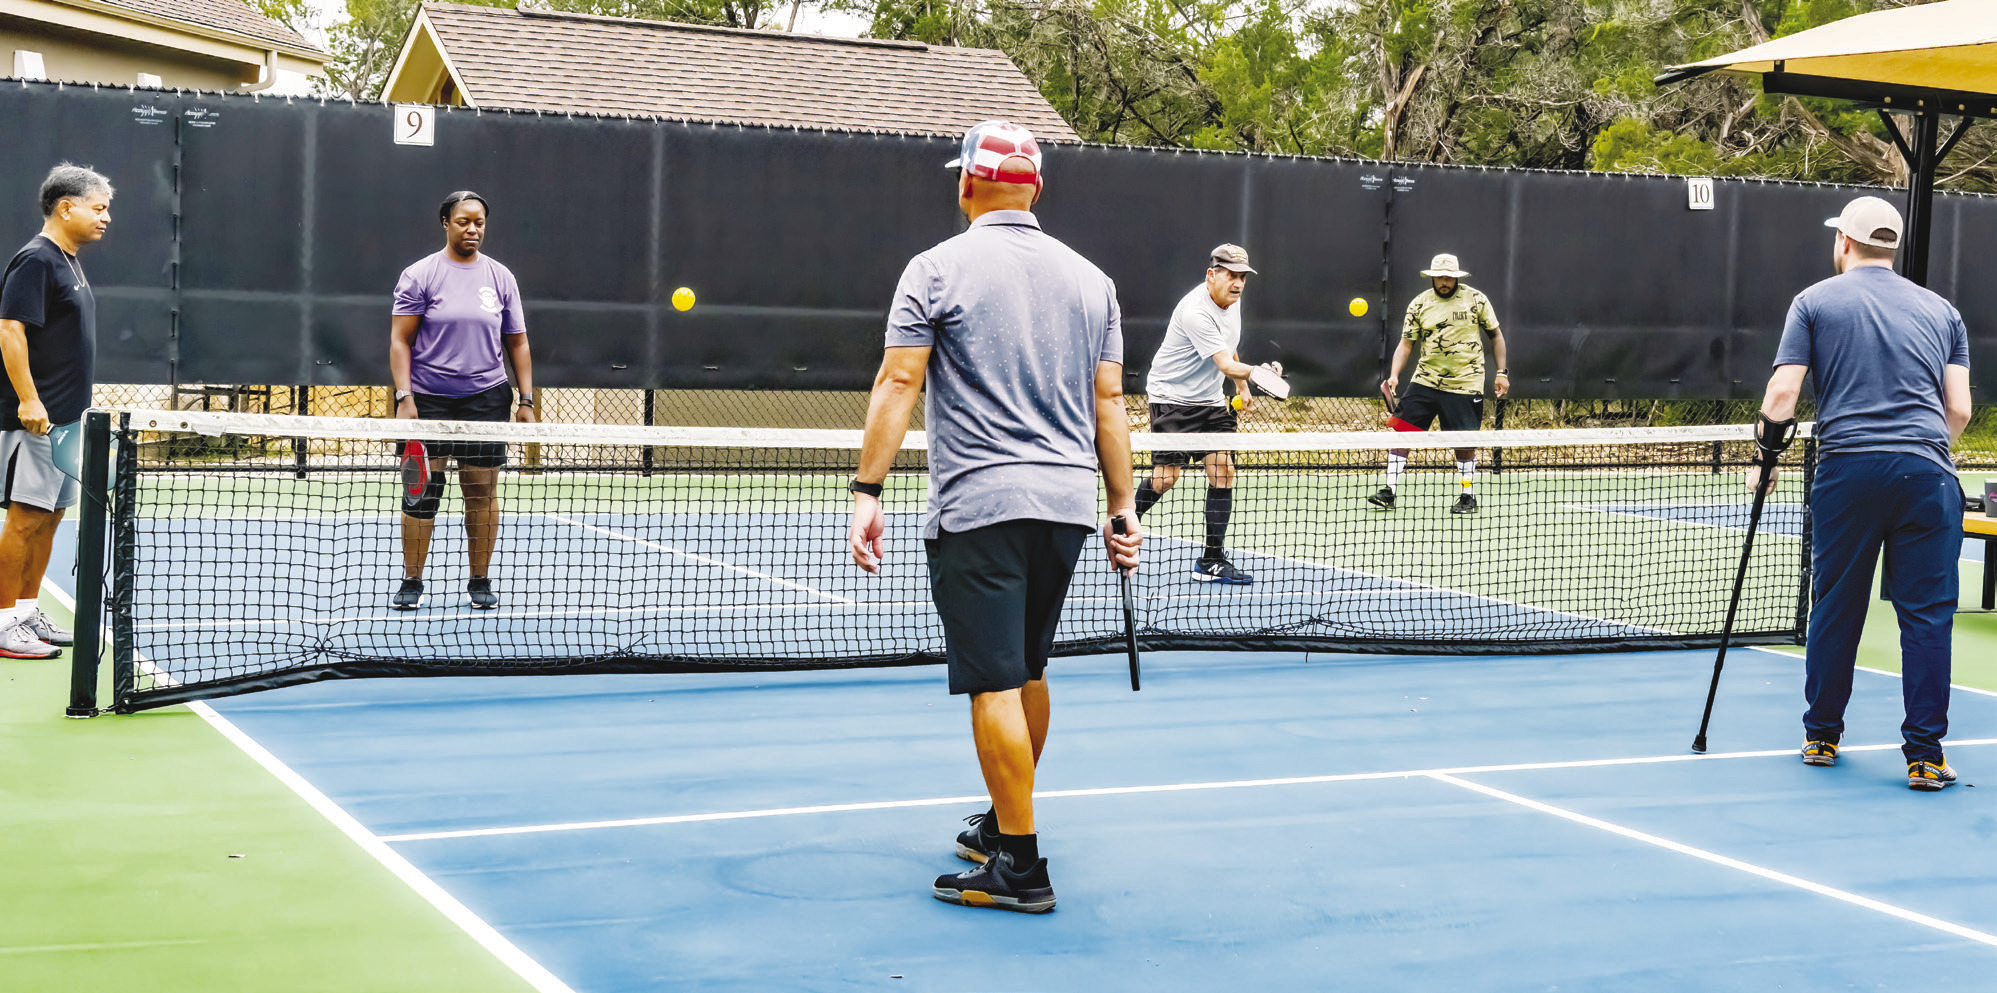 Georgetown area pickleball clubs honor out of town military group